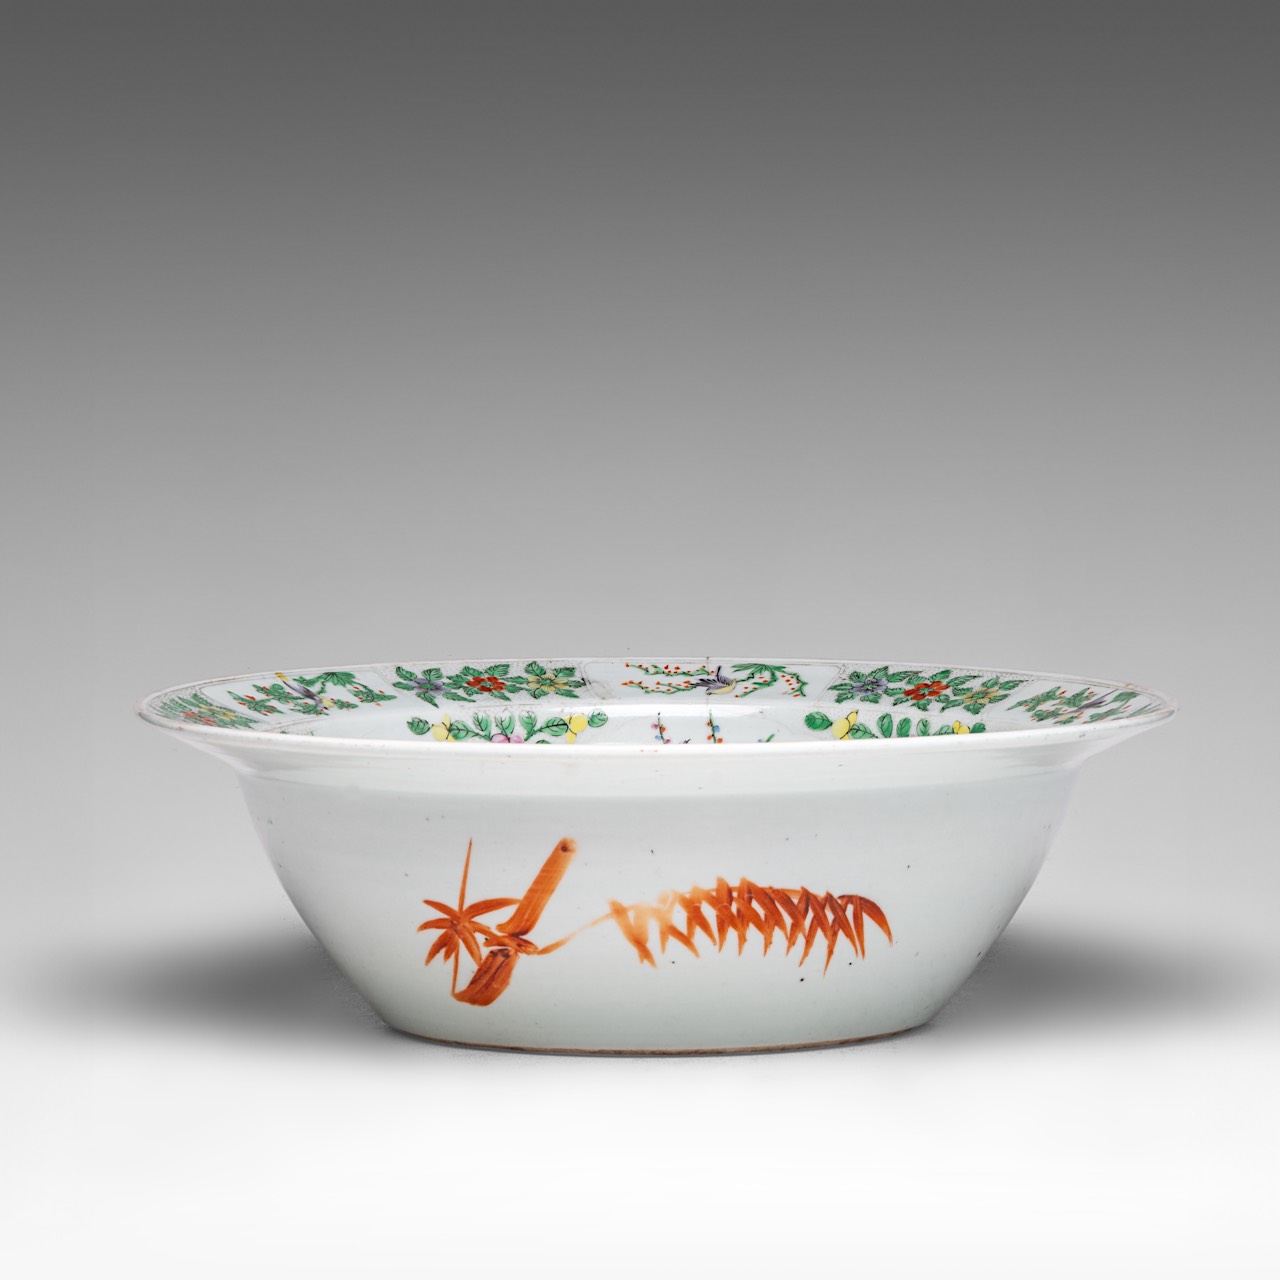 A Chinese Qianjiangcai 'Ladies in a chamber' basin bowl, late 19thC, dia 37,5 - H 11,8 cm - Image 6 of 7